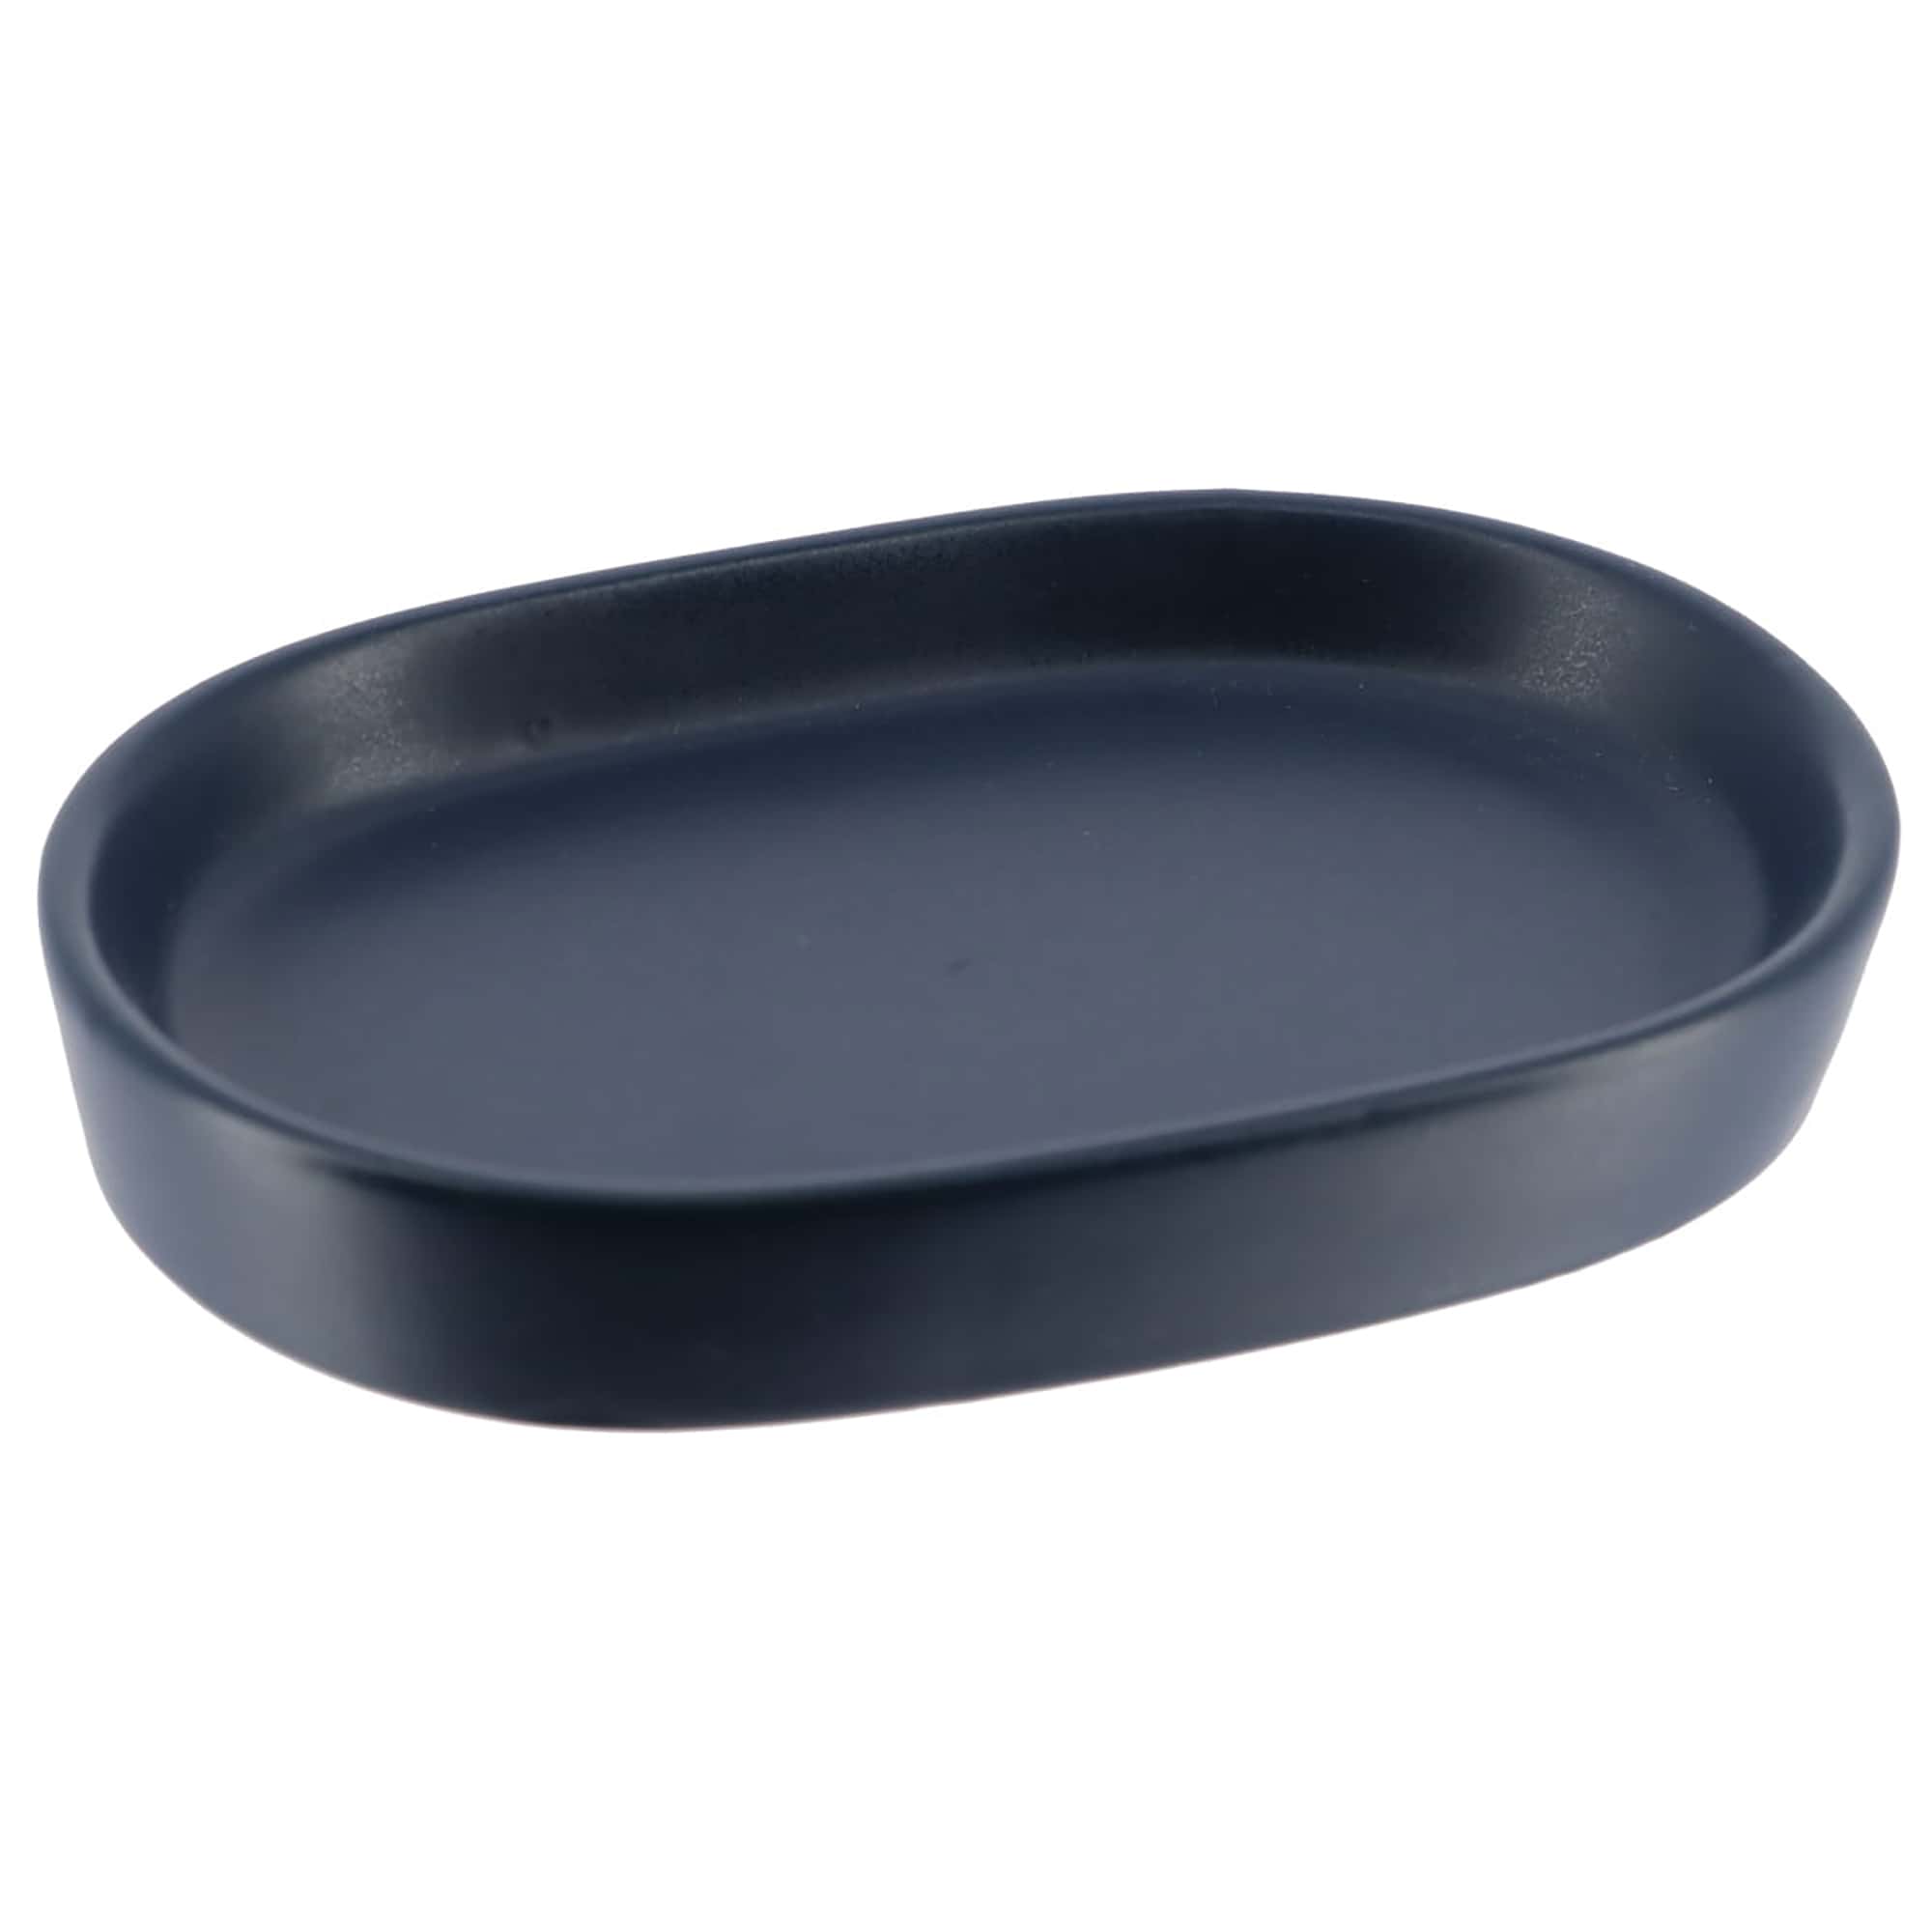 Stoneware Soap Dish Cup in Navy Blue - Get a Clean Soap Bar